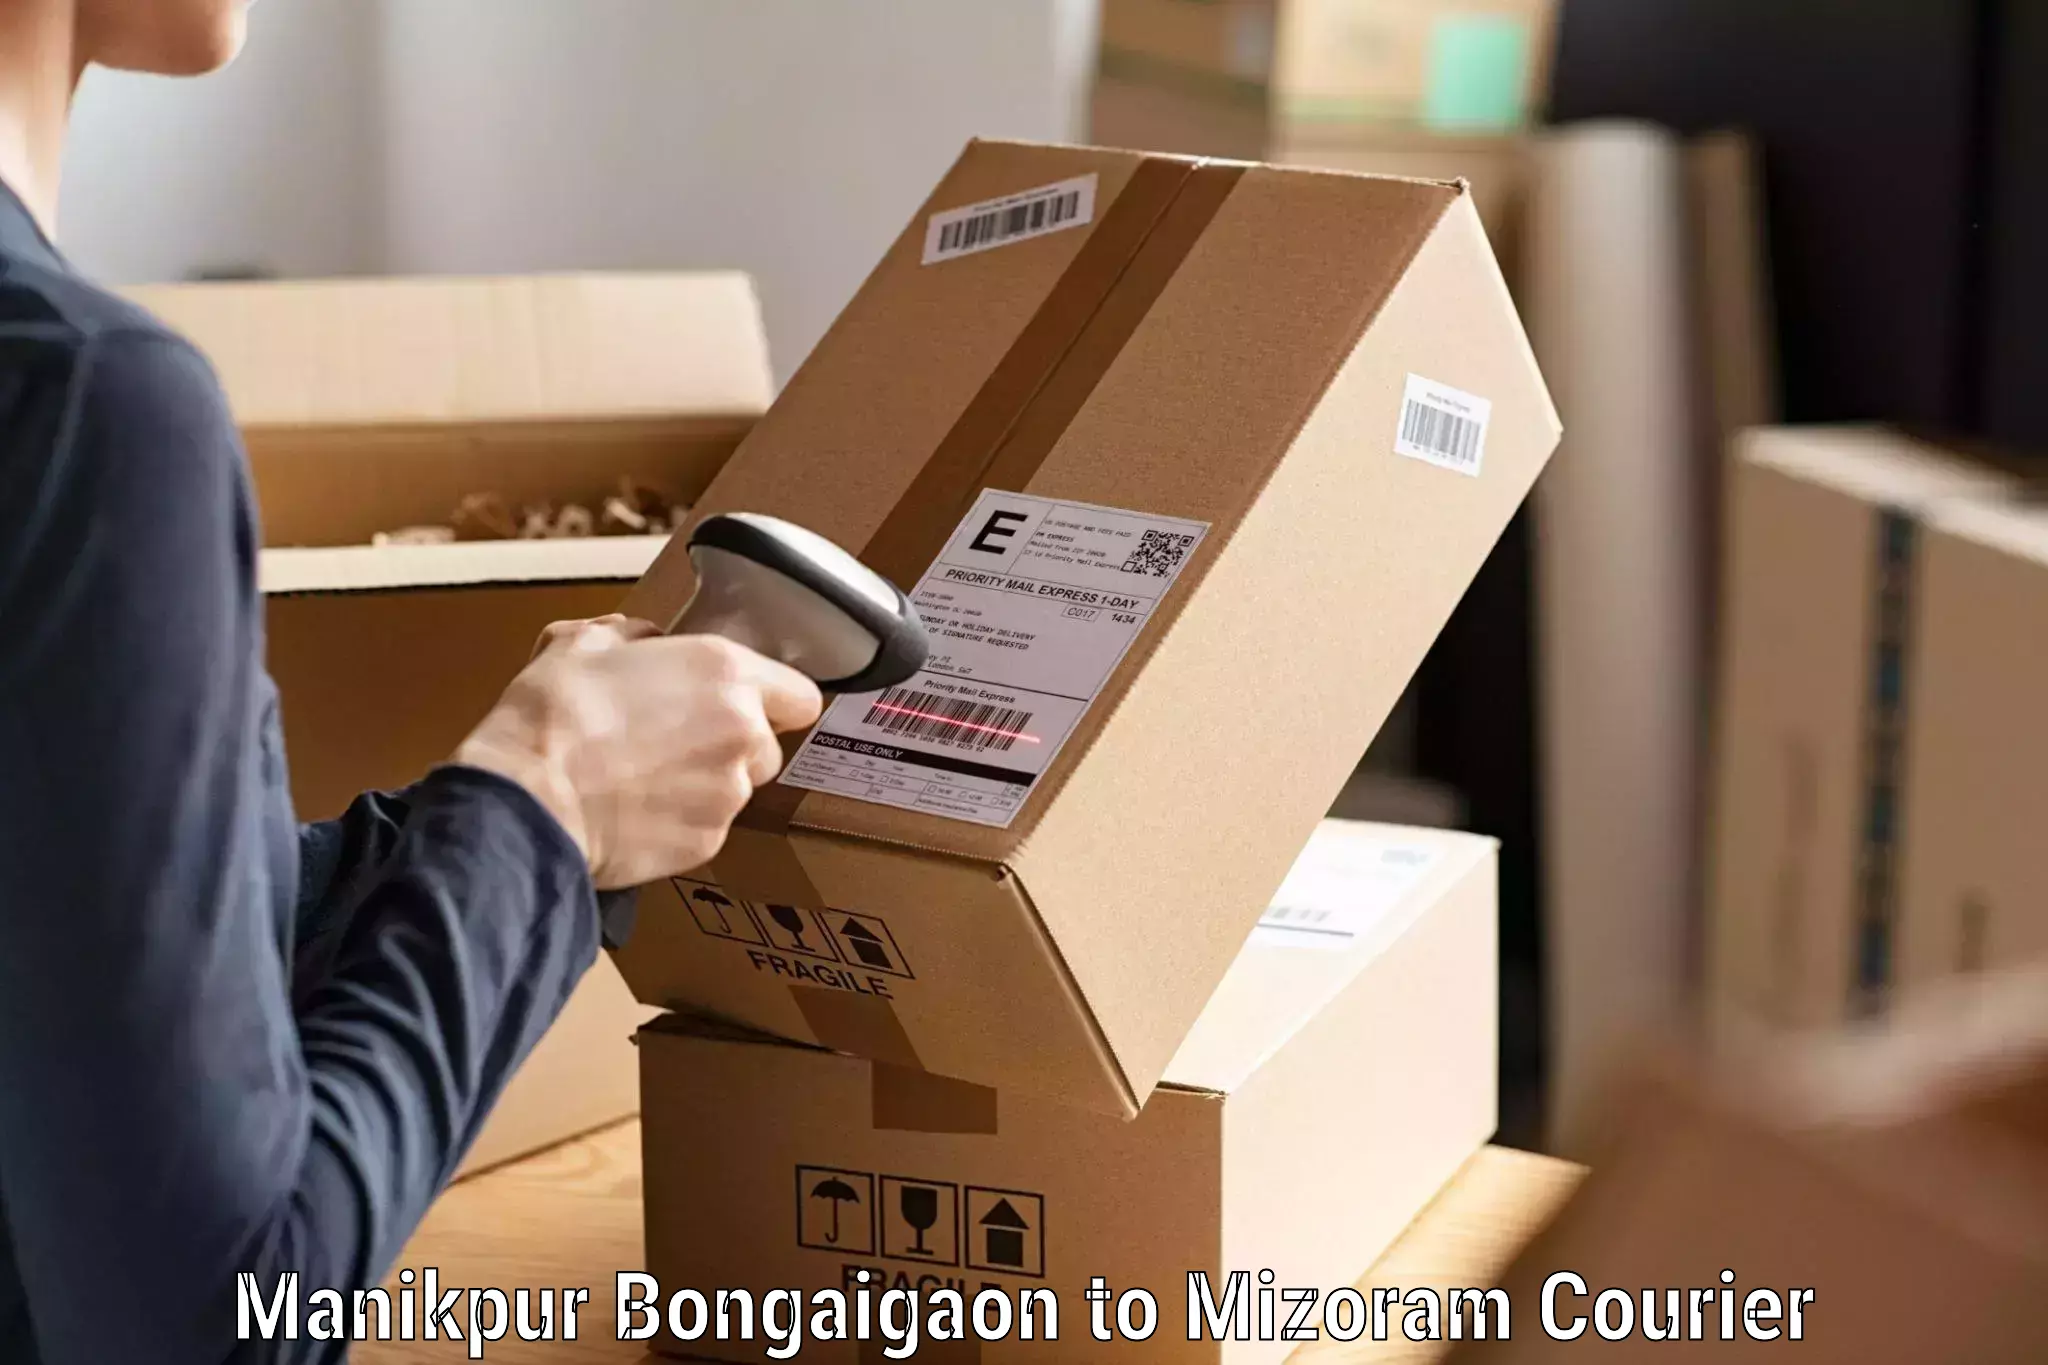 Easy access courier services Manikpur Bongaigaon to Aizawl